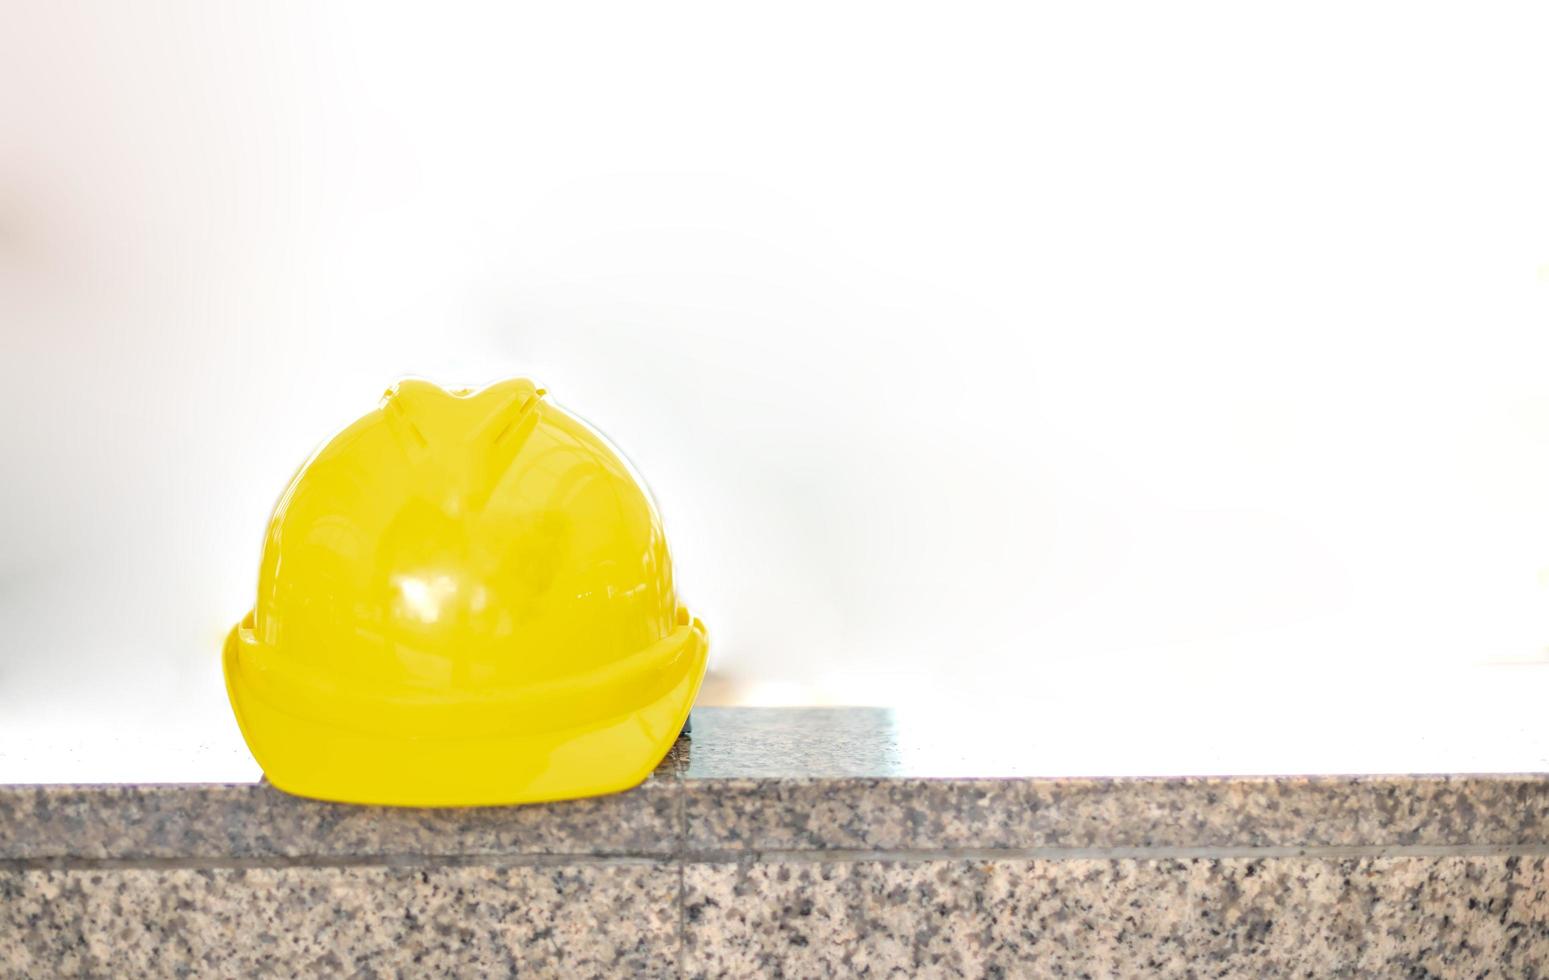 The yellow hard safety helmet hat for safety project of workman as engineer or worker put on the floor in the public city. photo